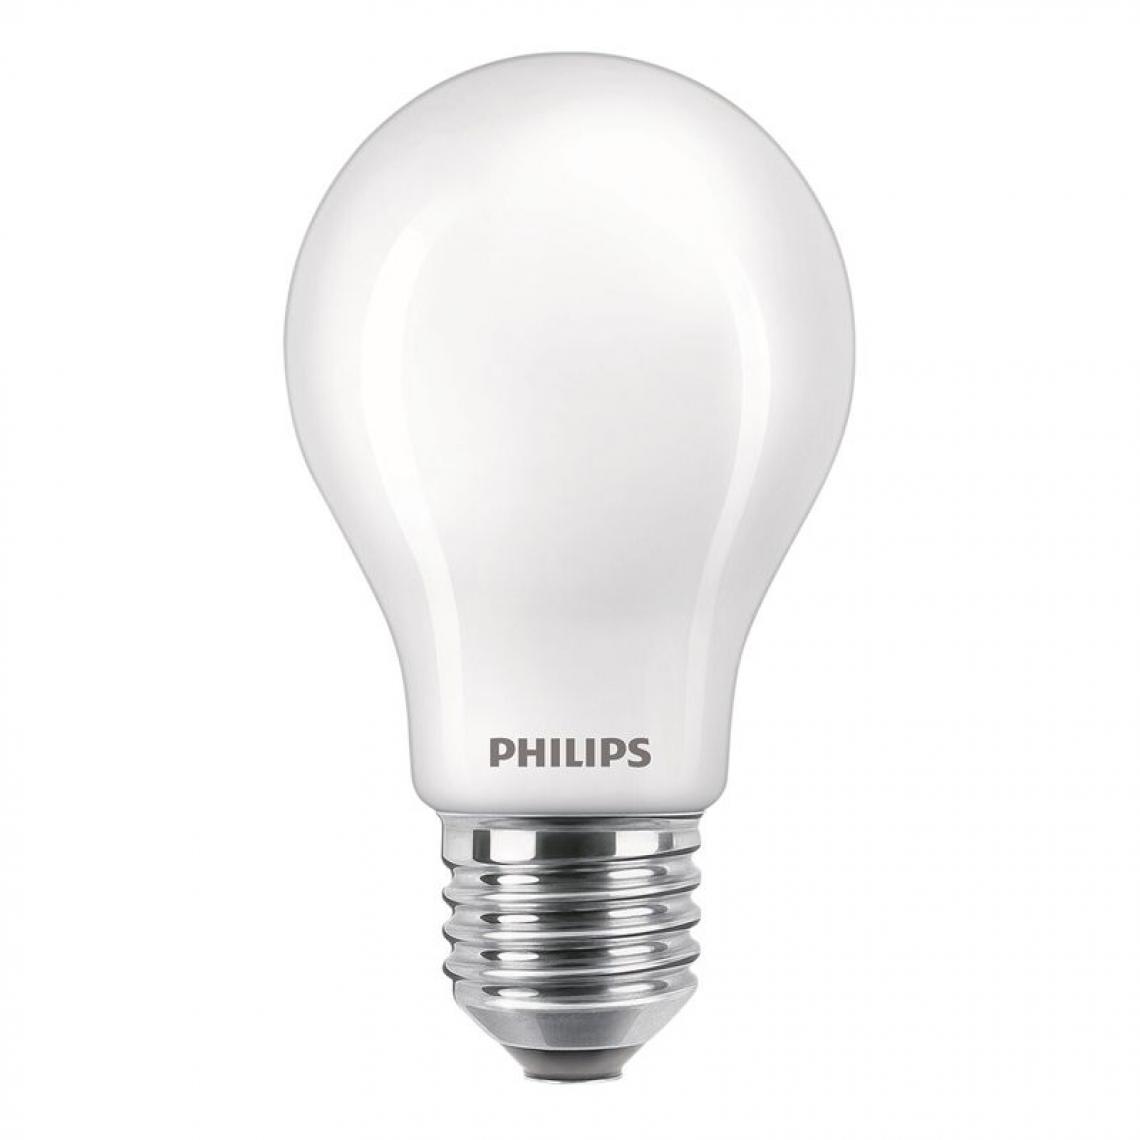 Philips - Ampoule LED dimmable E27 PHILIPS EQ100W standard blanc chaud - Ampoules LED